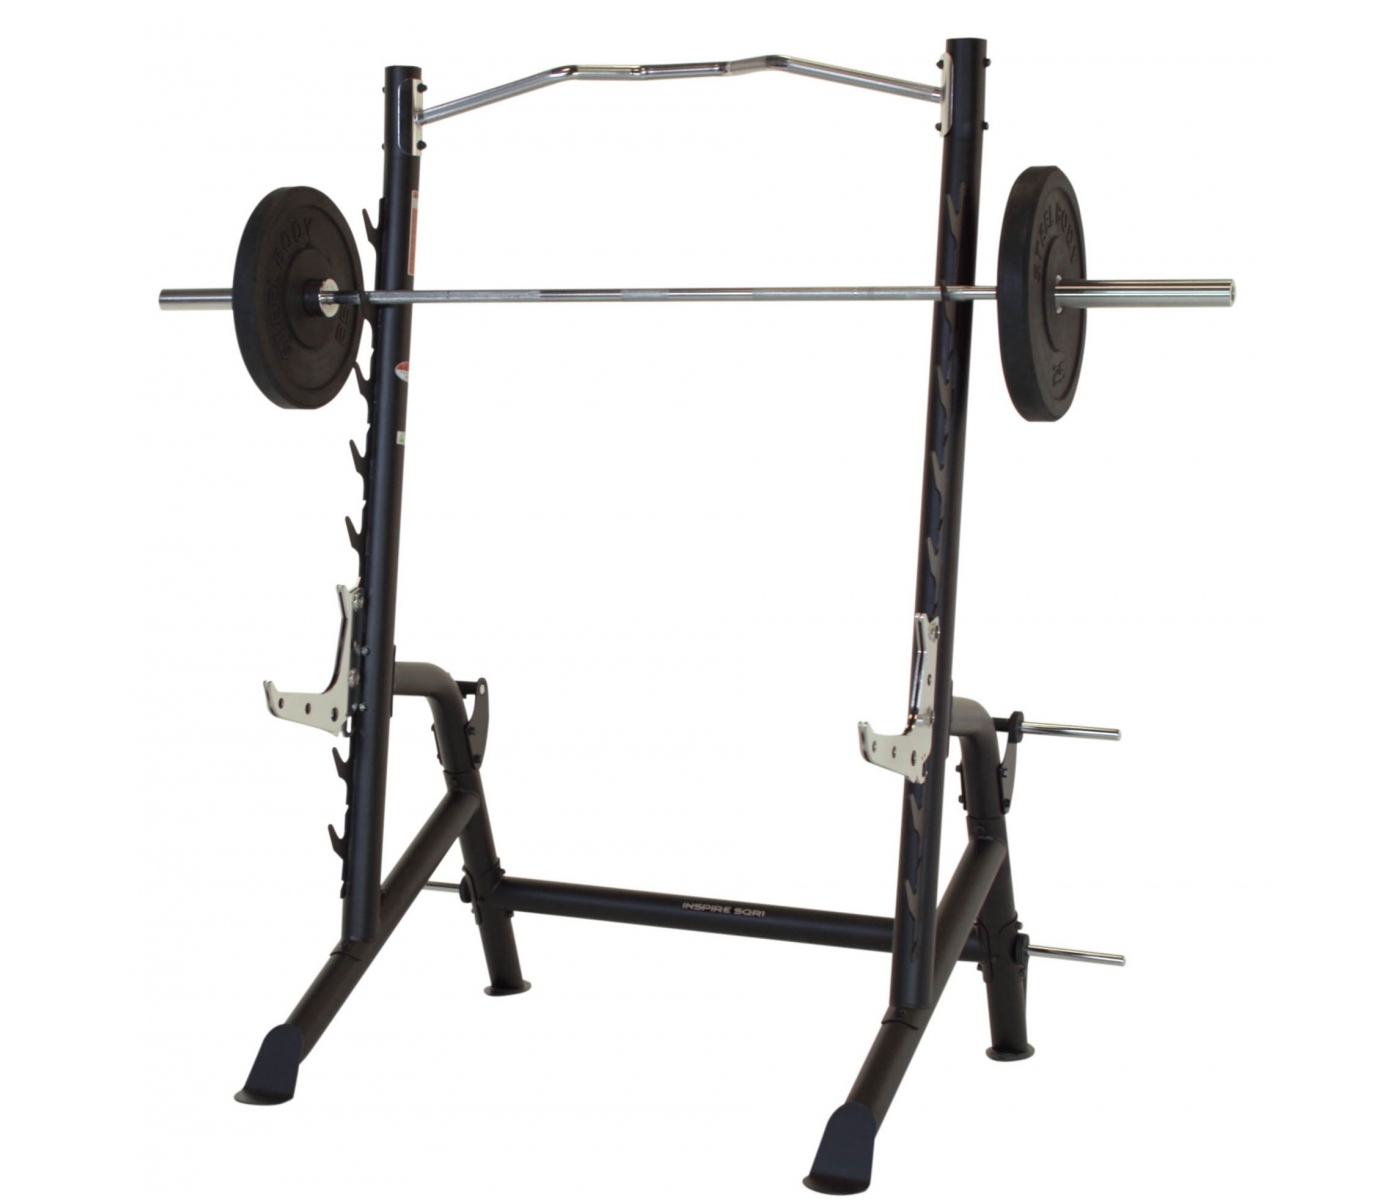 SquatRack with safeties